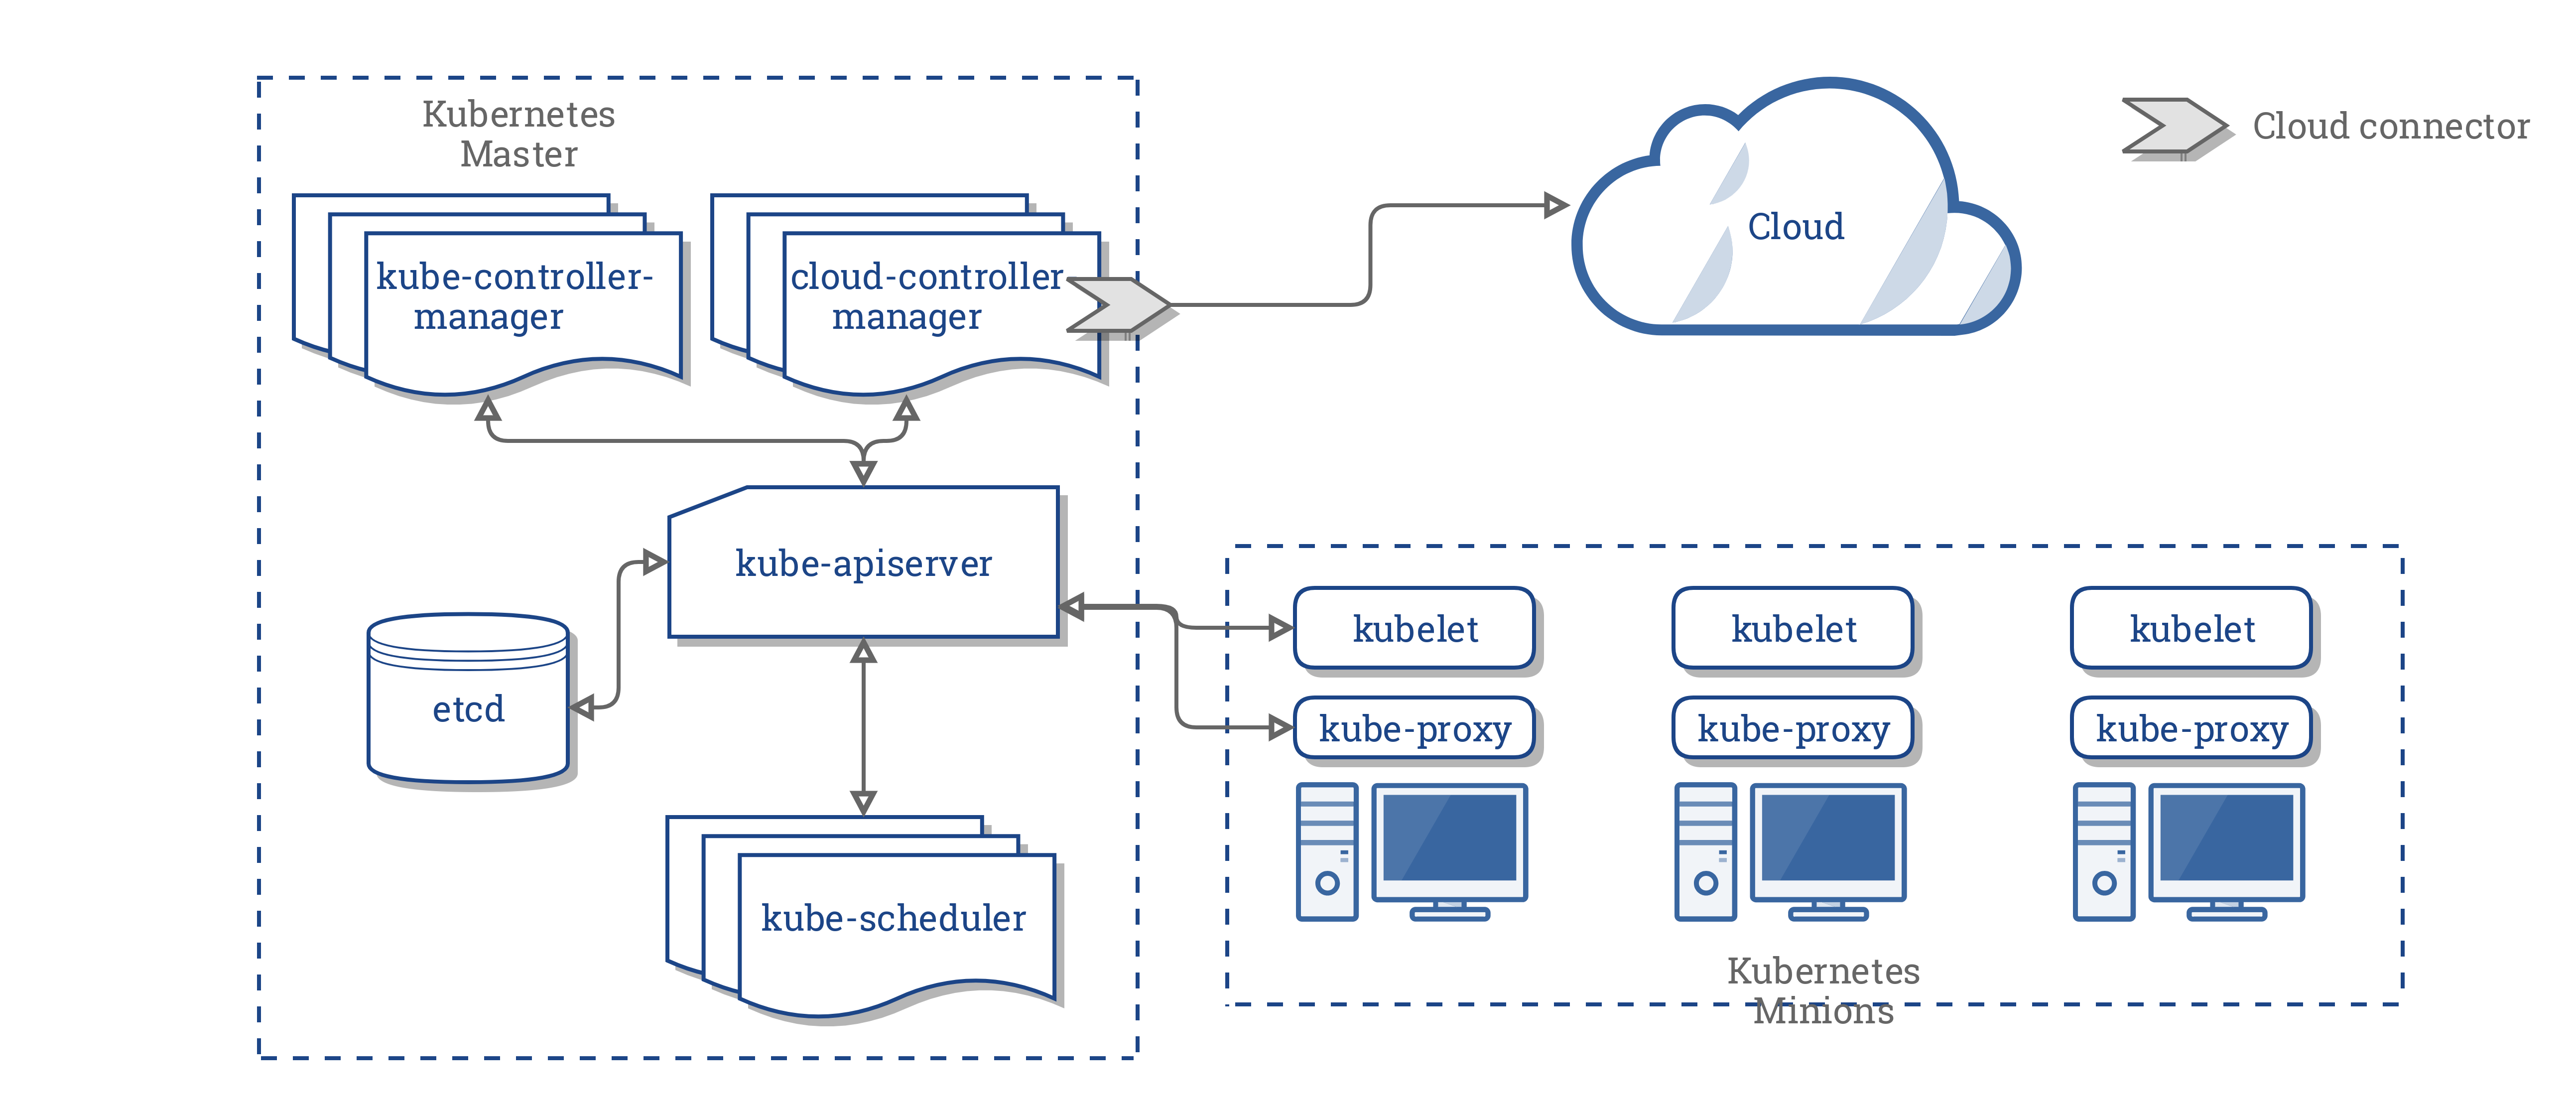 Out-of-Tree Cloud Provider Architecture (source: kubernetes.io)